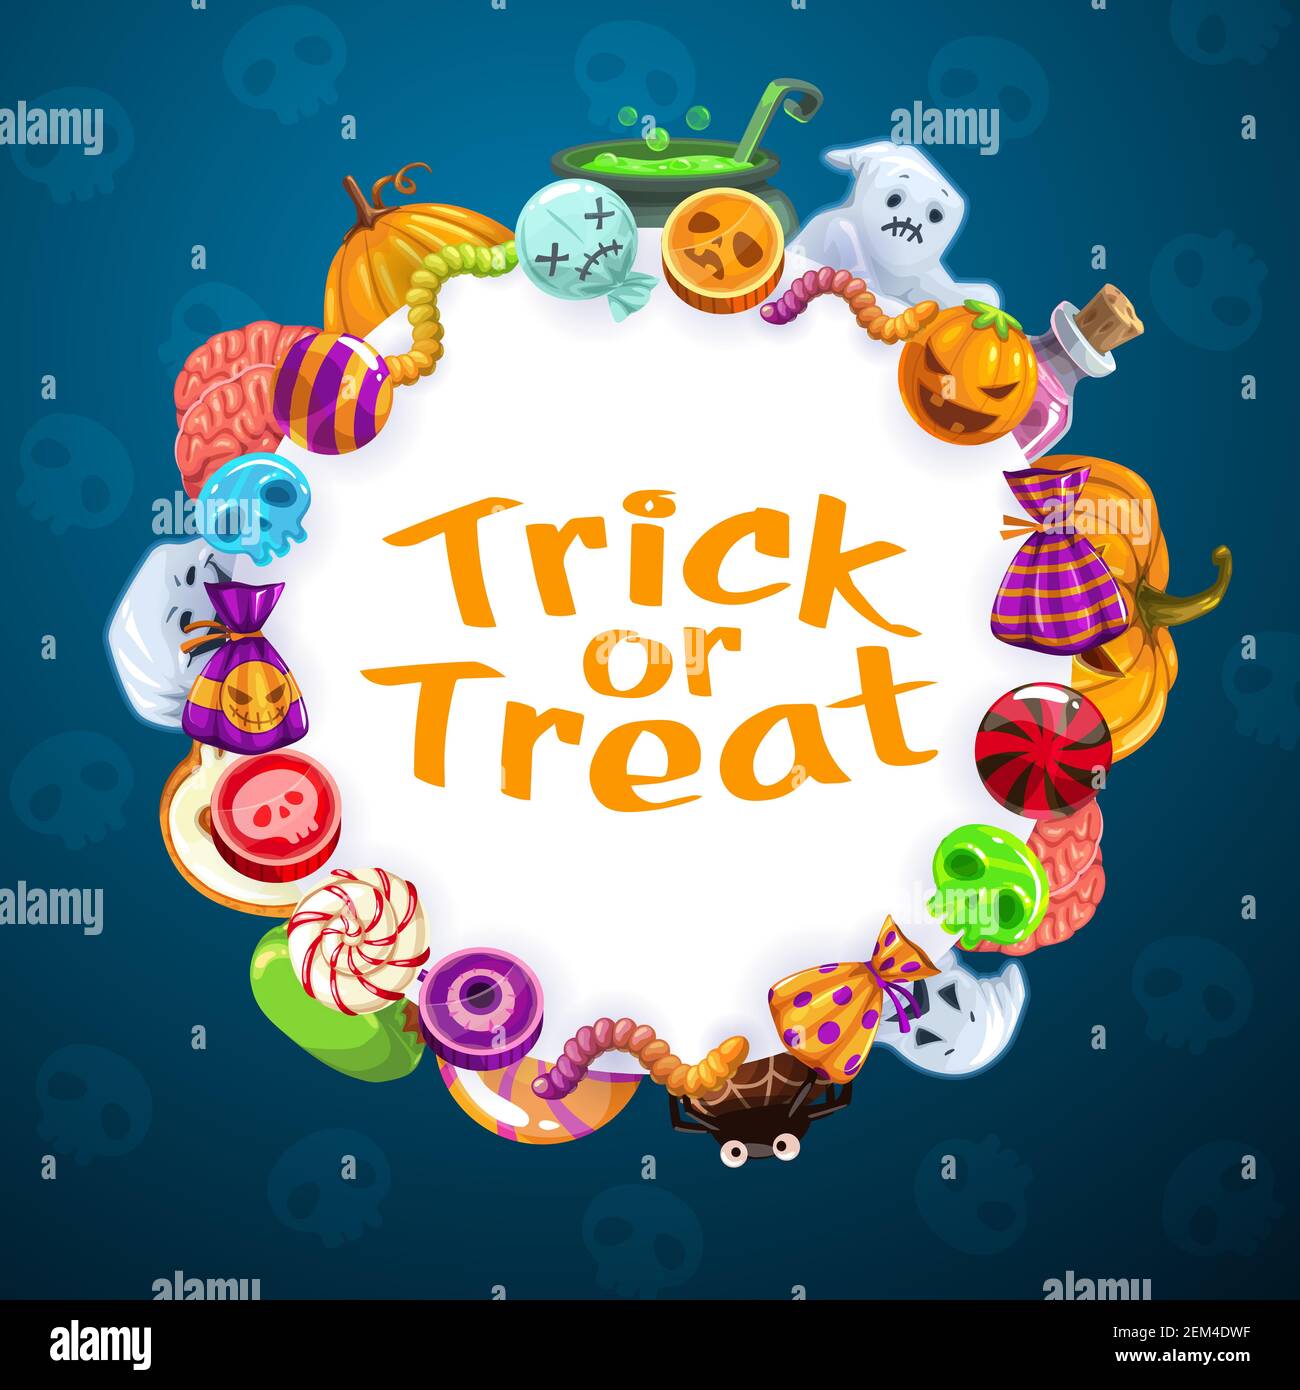 Google Doodle celebrates Halloween with a 'trick-or-treat' game